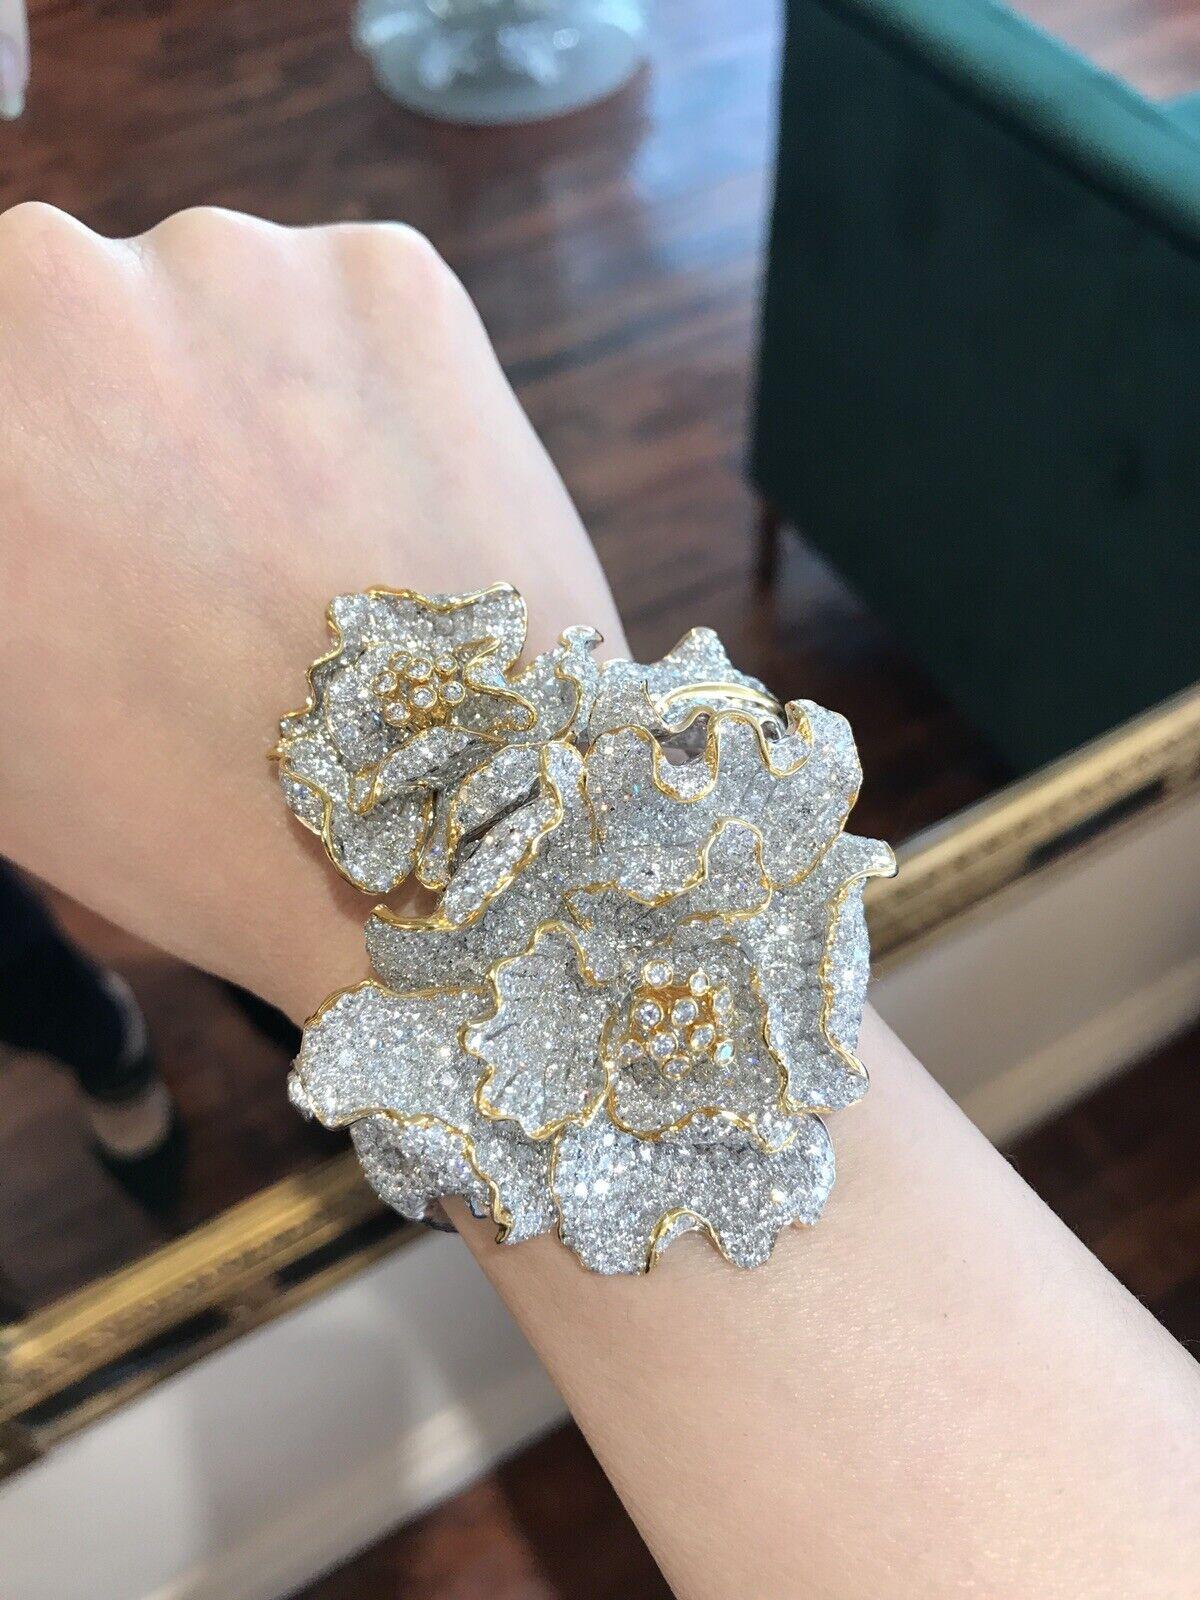 Large 47.80 carats Diamond Flower Bangle Bracelet in 18k White and Yellow Gold
Features
2 Flowers beautifully detailed with overlapping petals and leaf with Articulated center pistils in the center of each flower
Top of Bracelet is completely